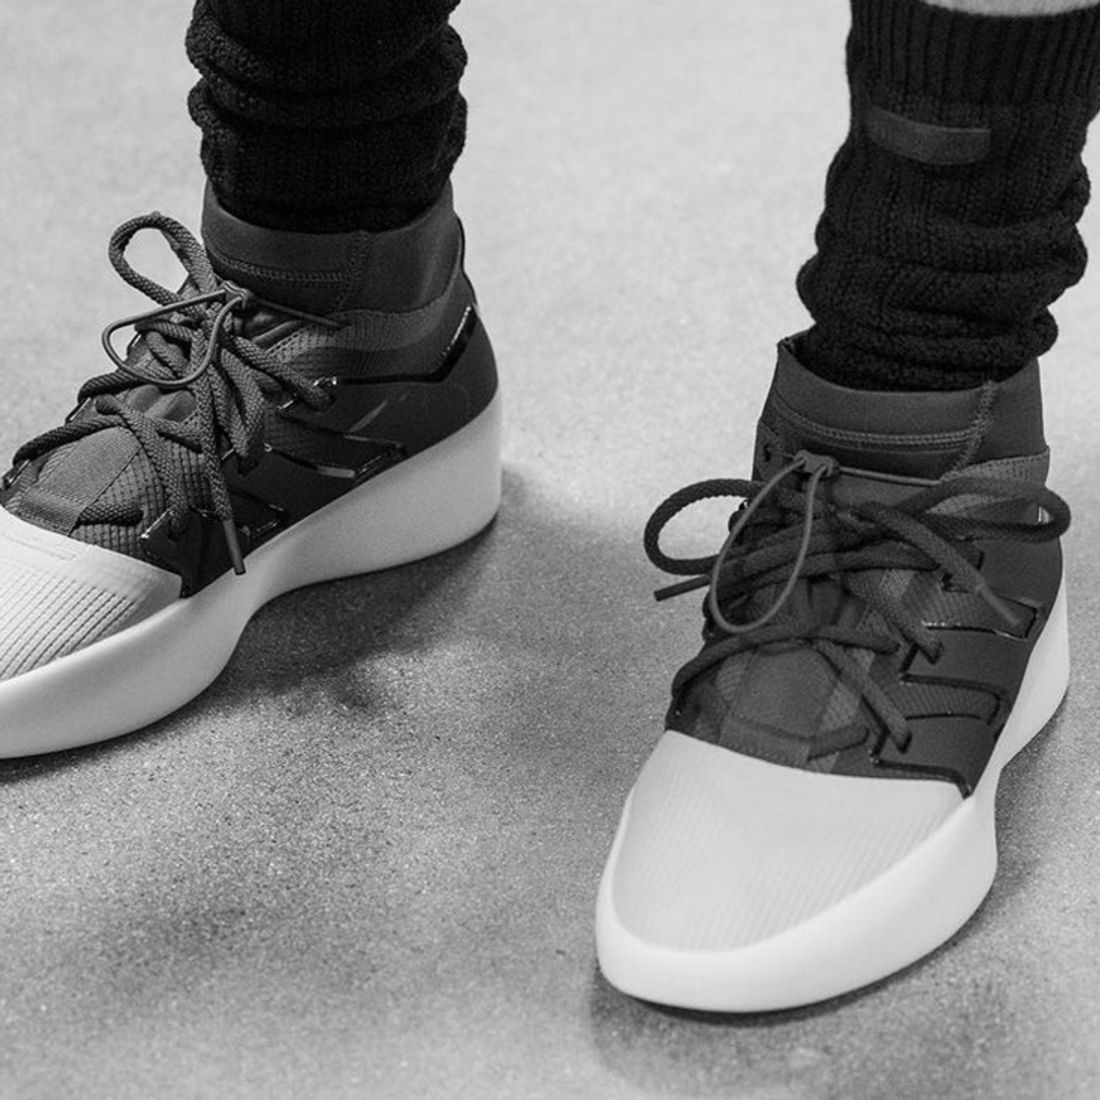 First Look At The Fear of God x adidas Collection